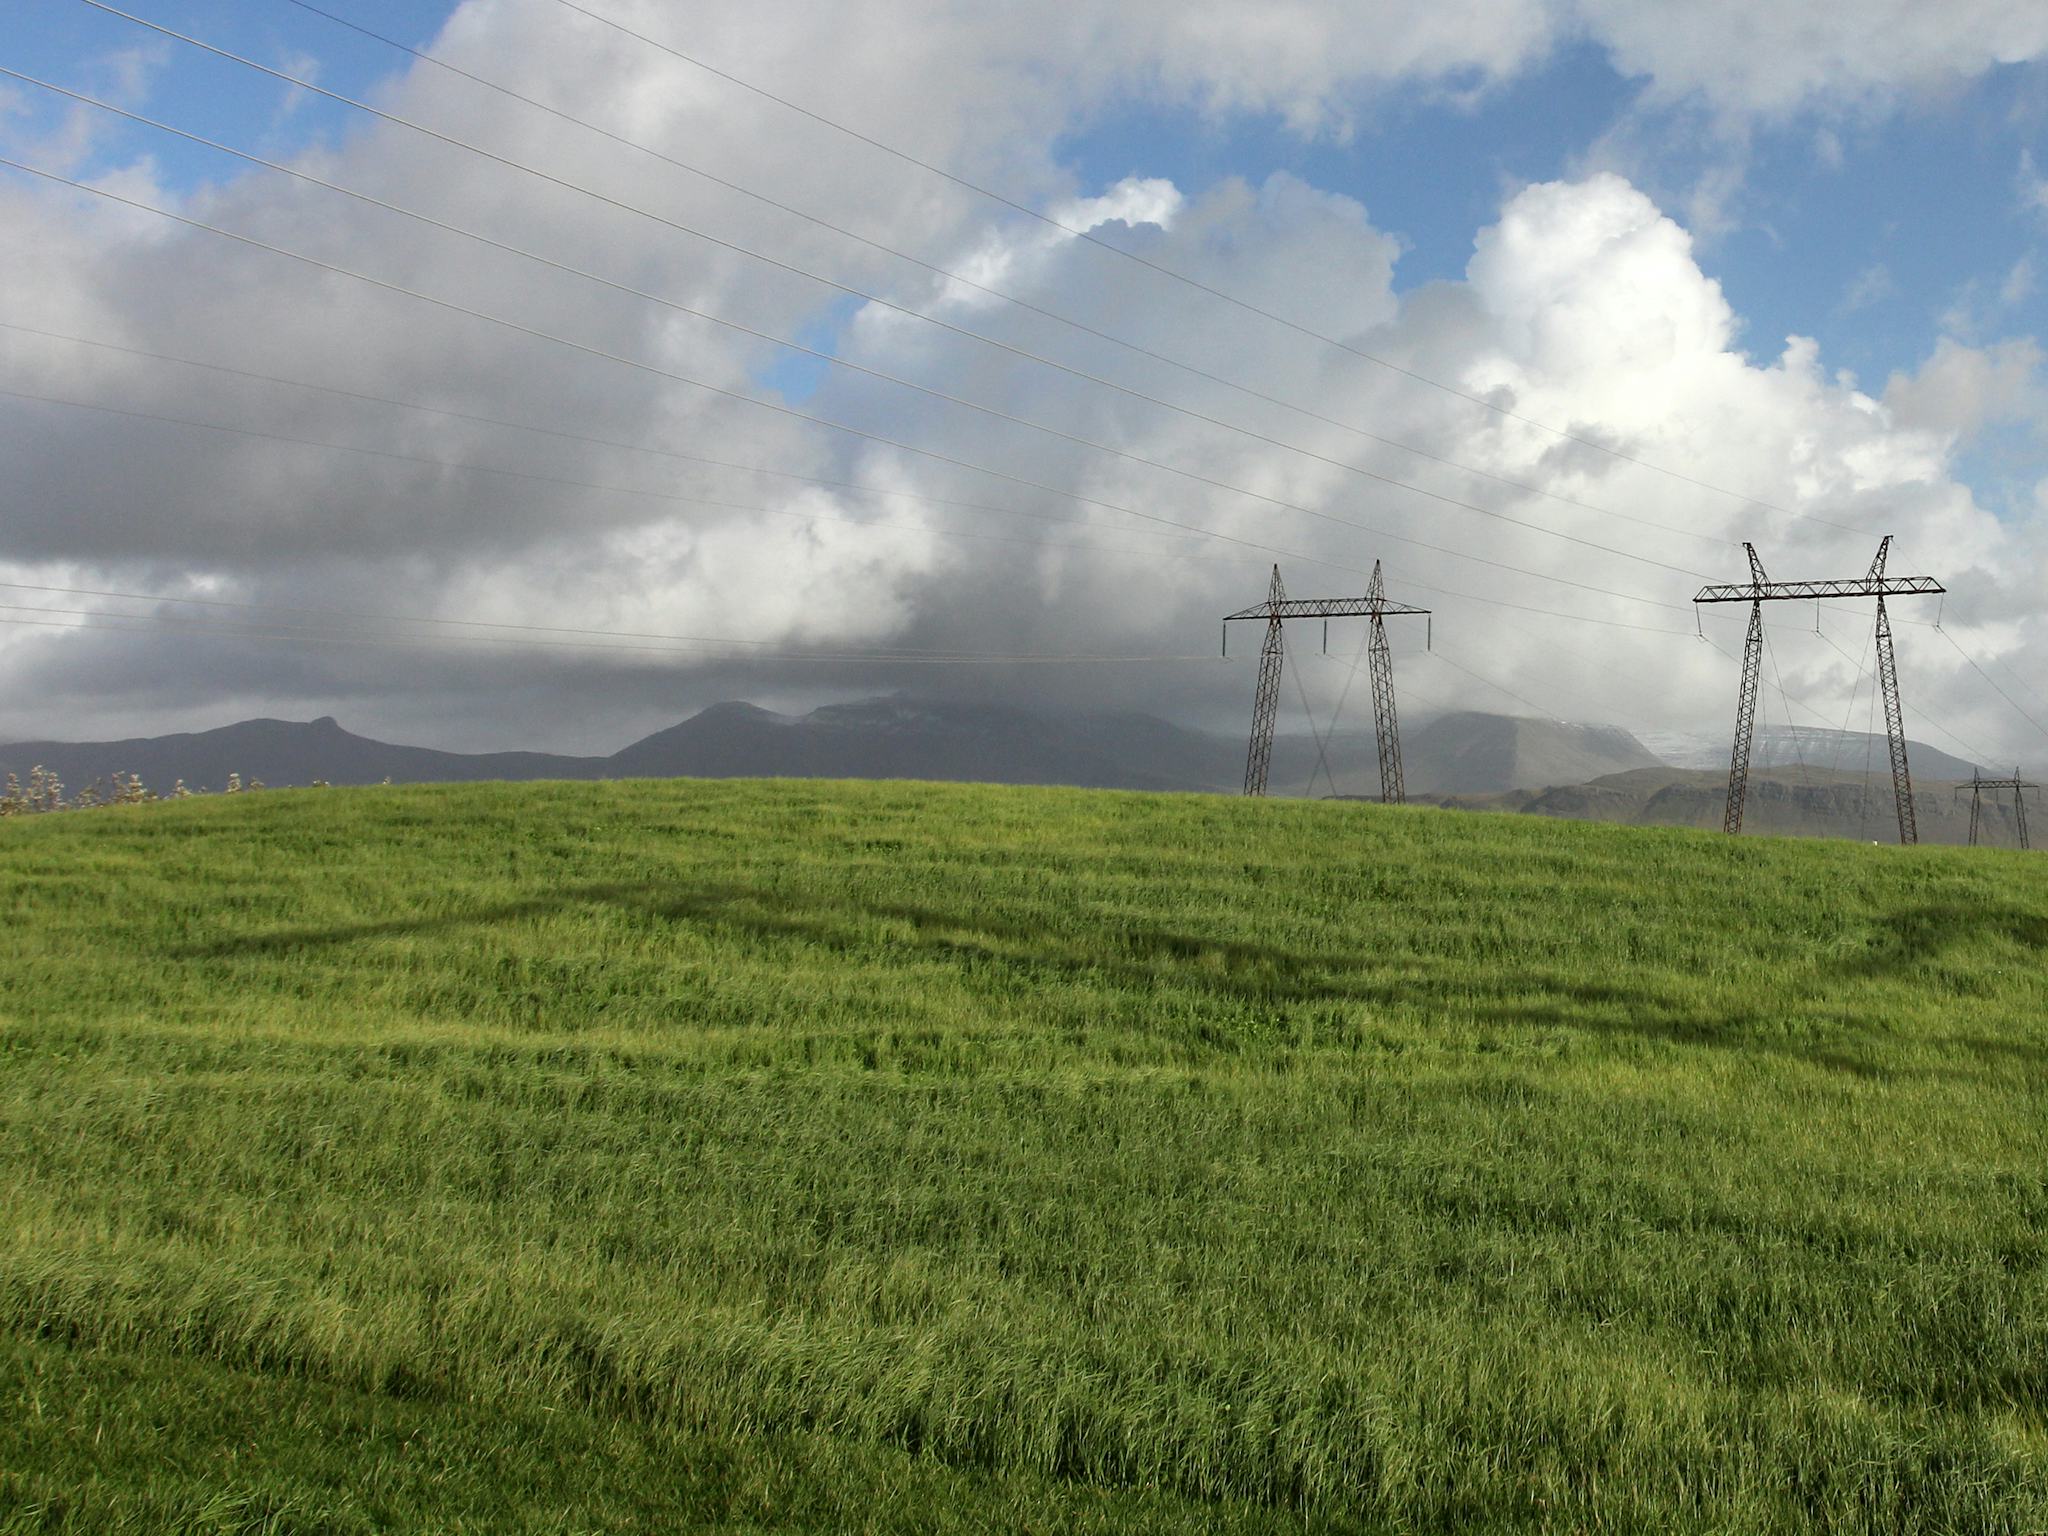 Electricity lines and masts on a green hill, mountains and dramatic clouds in the background